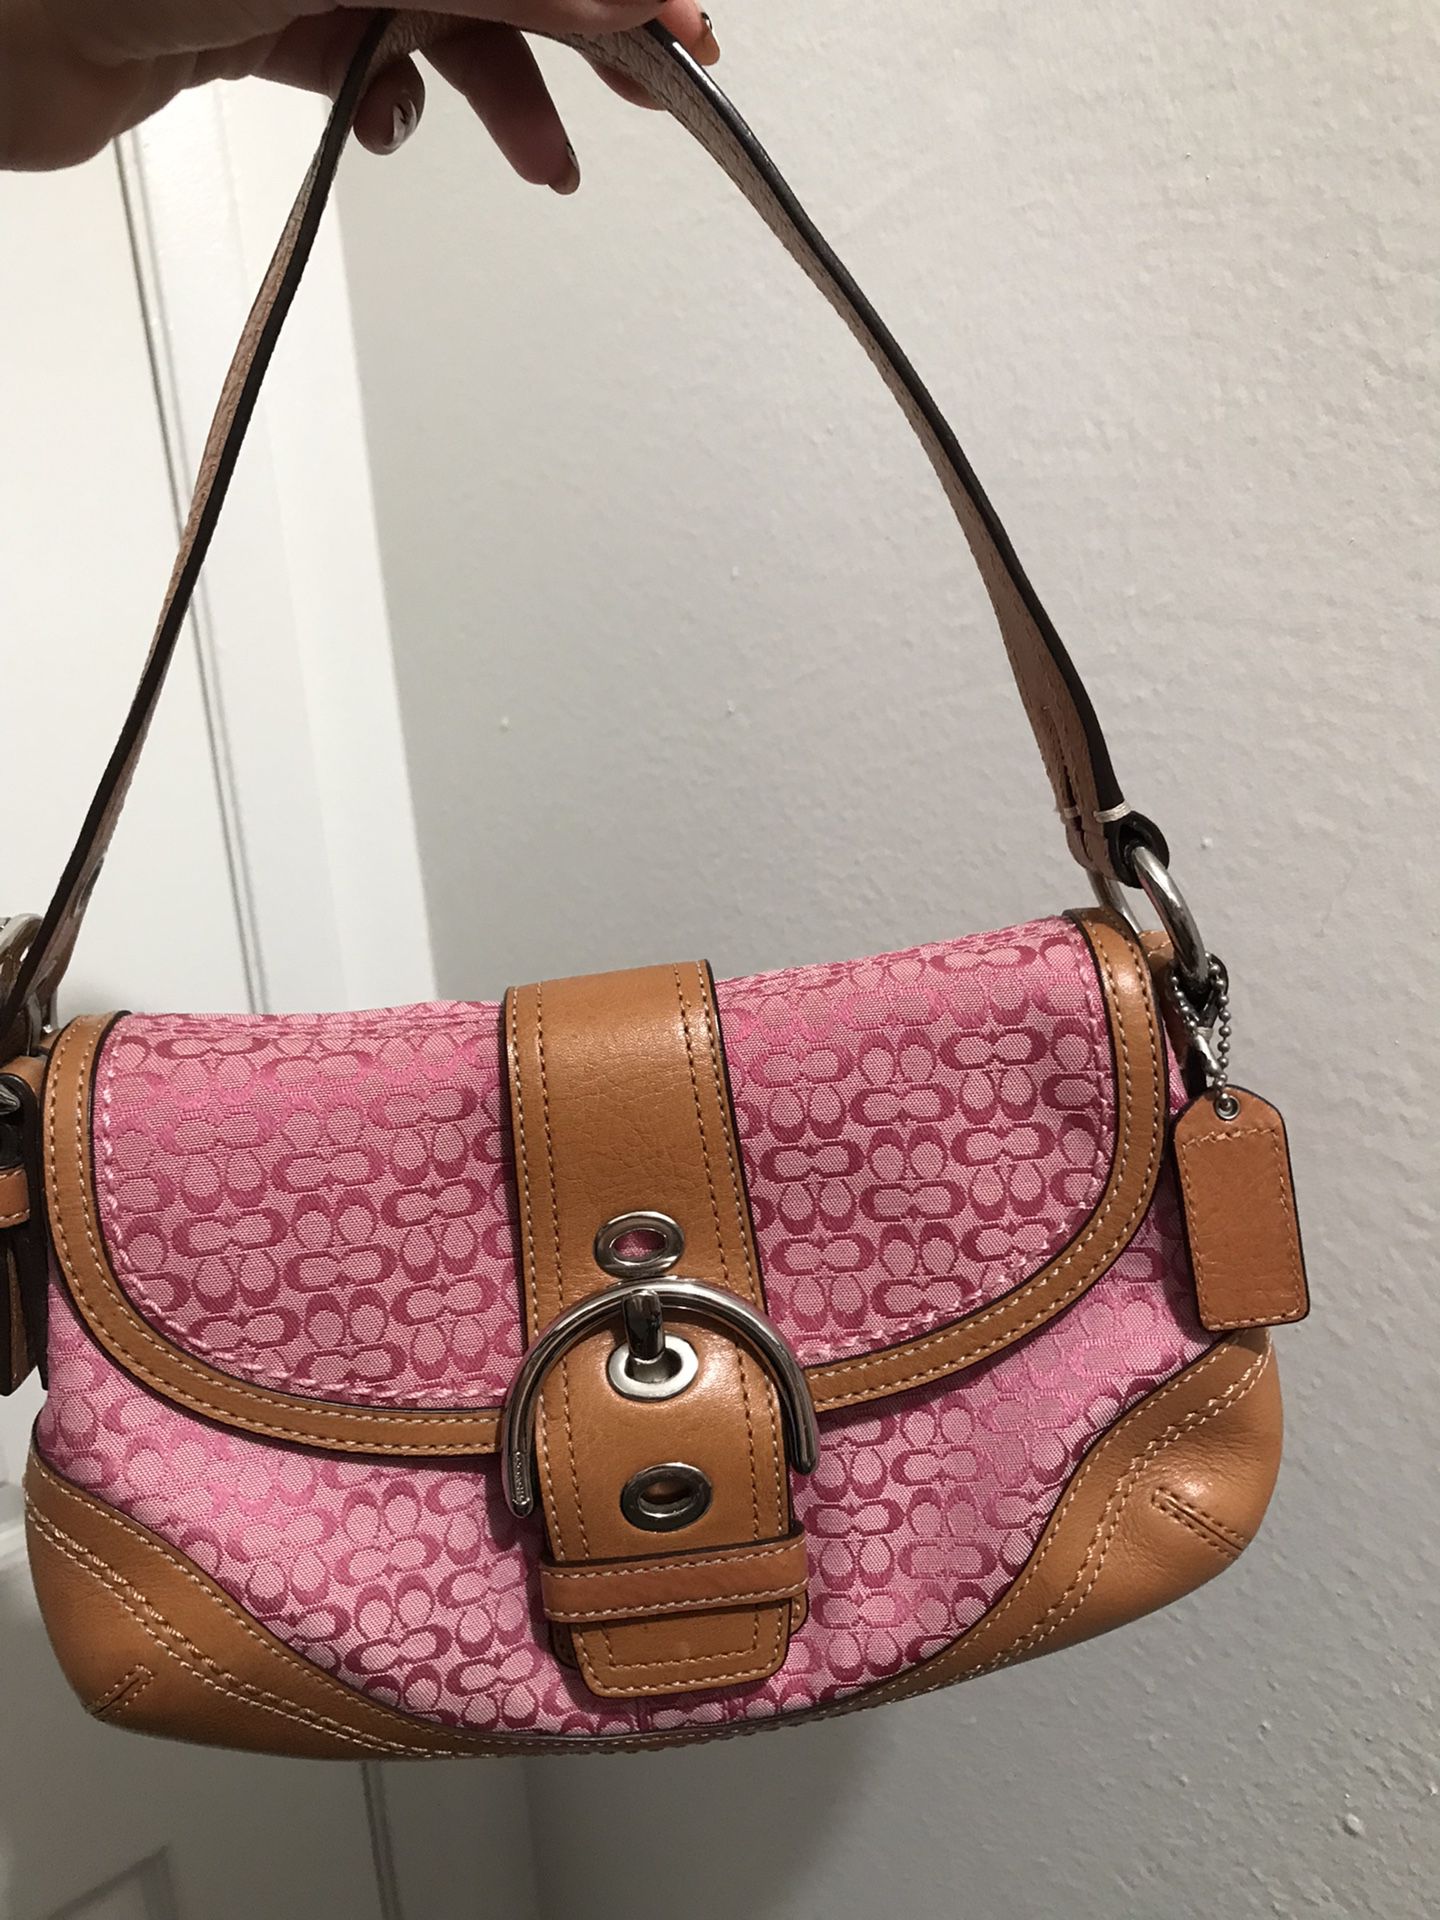 *COACH* Coach Pink Canvas/ Patent Leather Triple Opening Shoulder Bag Purse  for Sale in Tucson, AZ - OfferUp